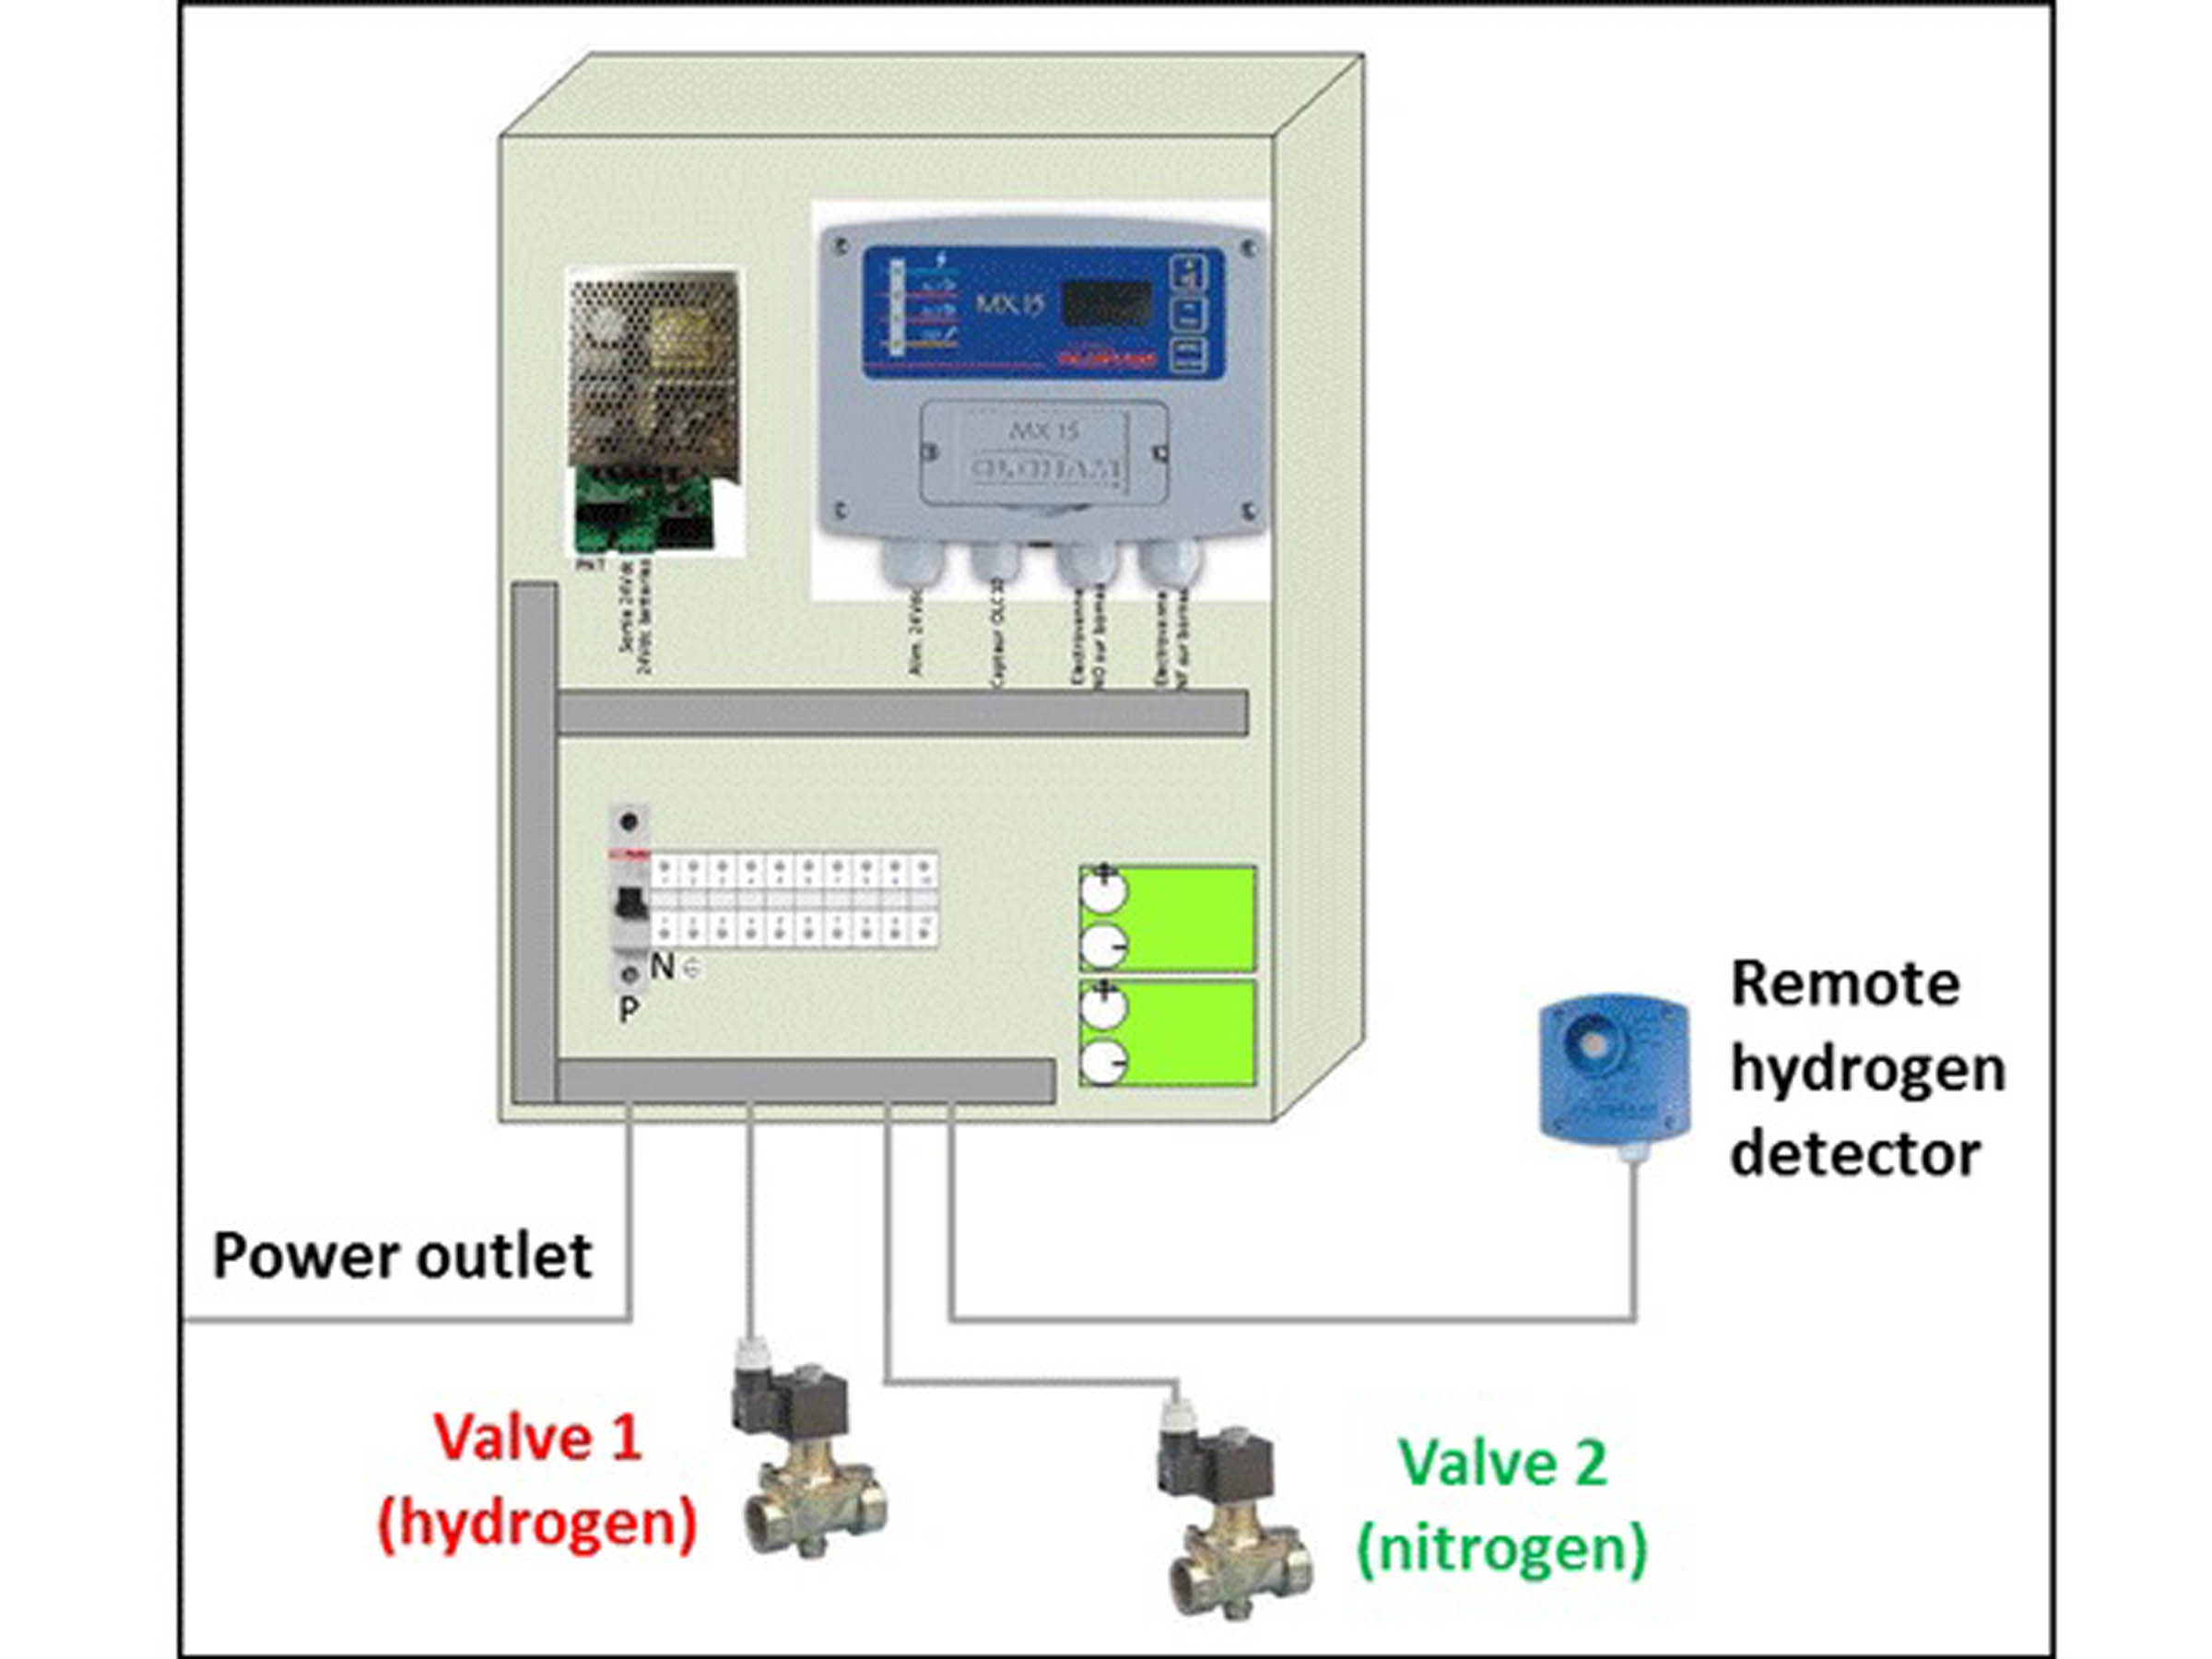 H2_security_box_hydrogen_methane_air_ammonia_h2_ch4_nh3_alcohol_remote_detector_detection_purge_nitrogen_n2_valve_steam_generator_methane_steam_reforming_processing_fuel_cell_sofc_soec_pem_AFC_MCFC_setup_bench_rig_stand_station_system.jpg